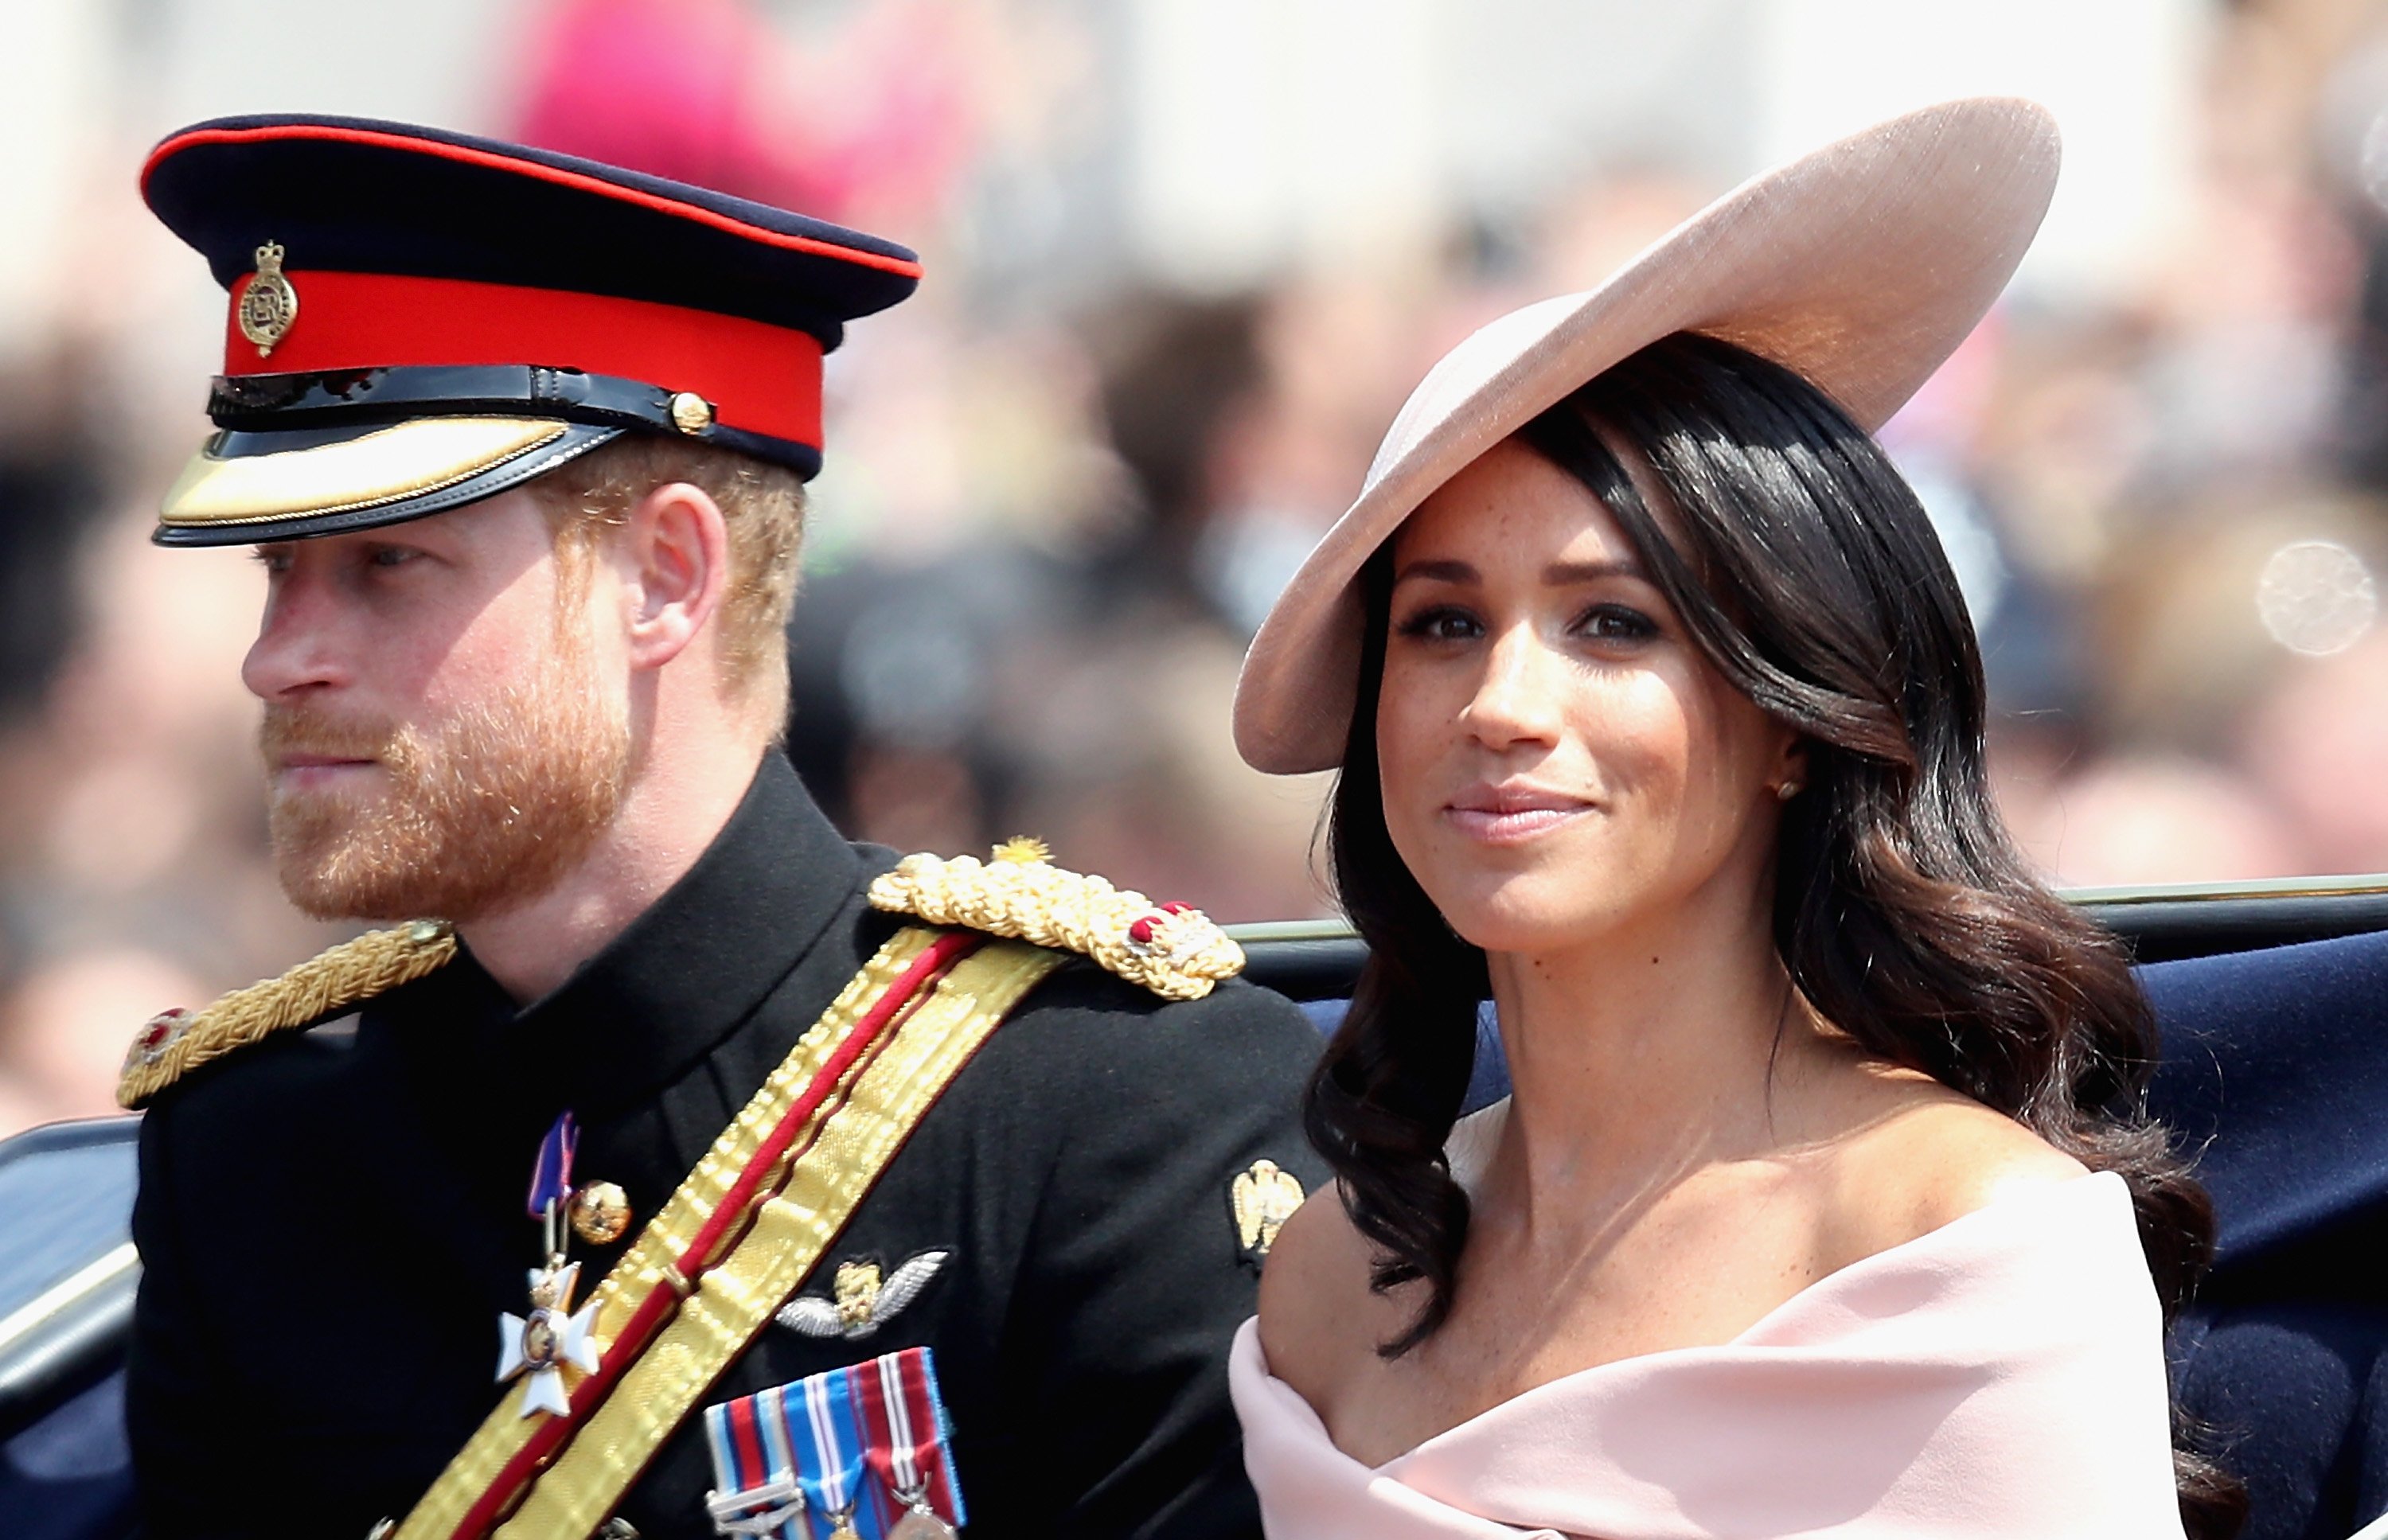 Prince Harry and Meghan Markle during Trooping The Colour on the Mall on June 9, 2018 in London, England | Photo: Getty Images